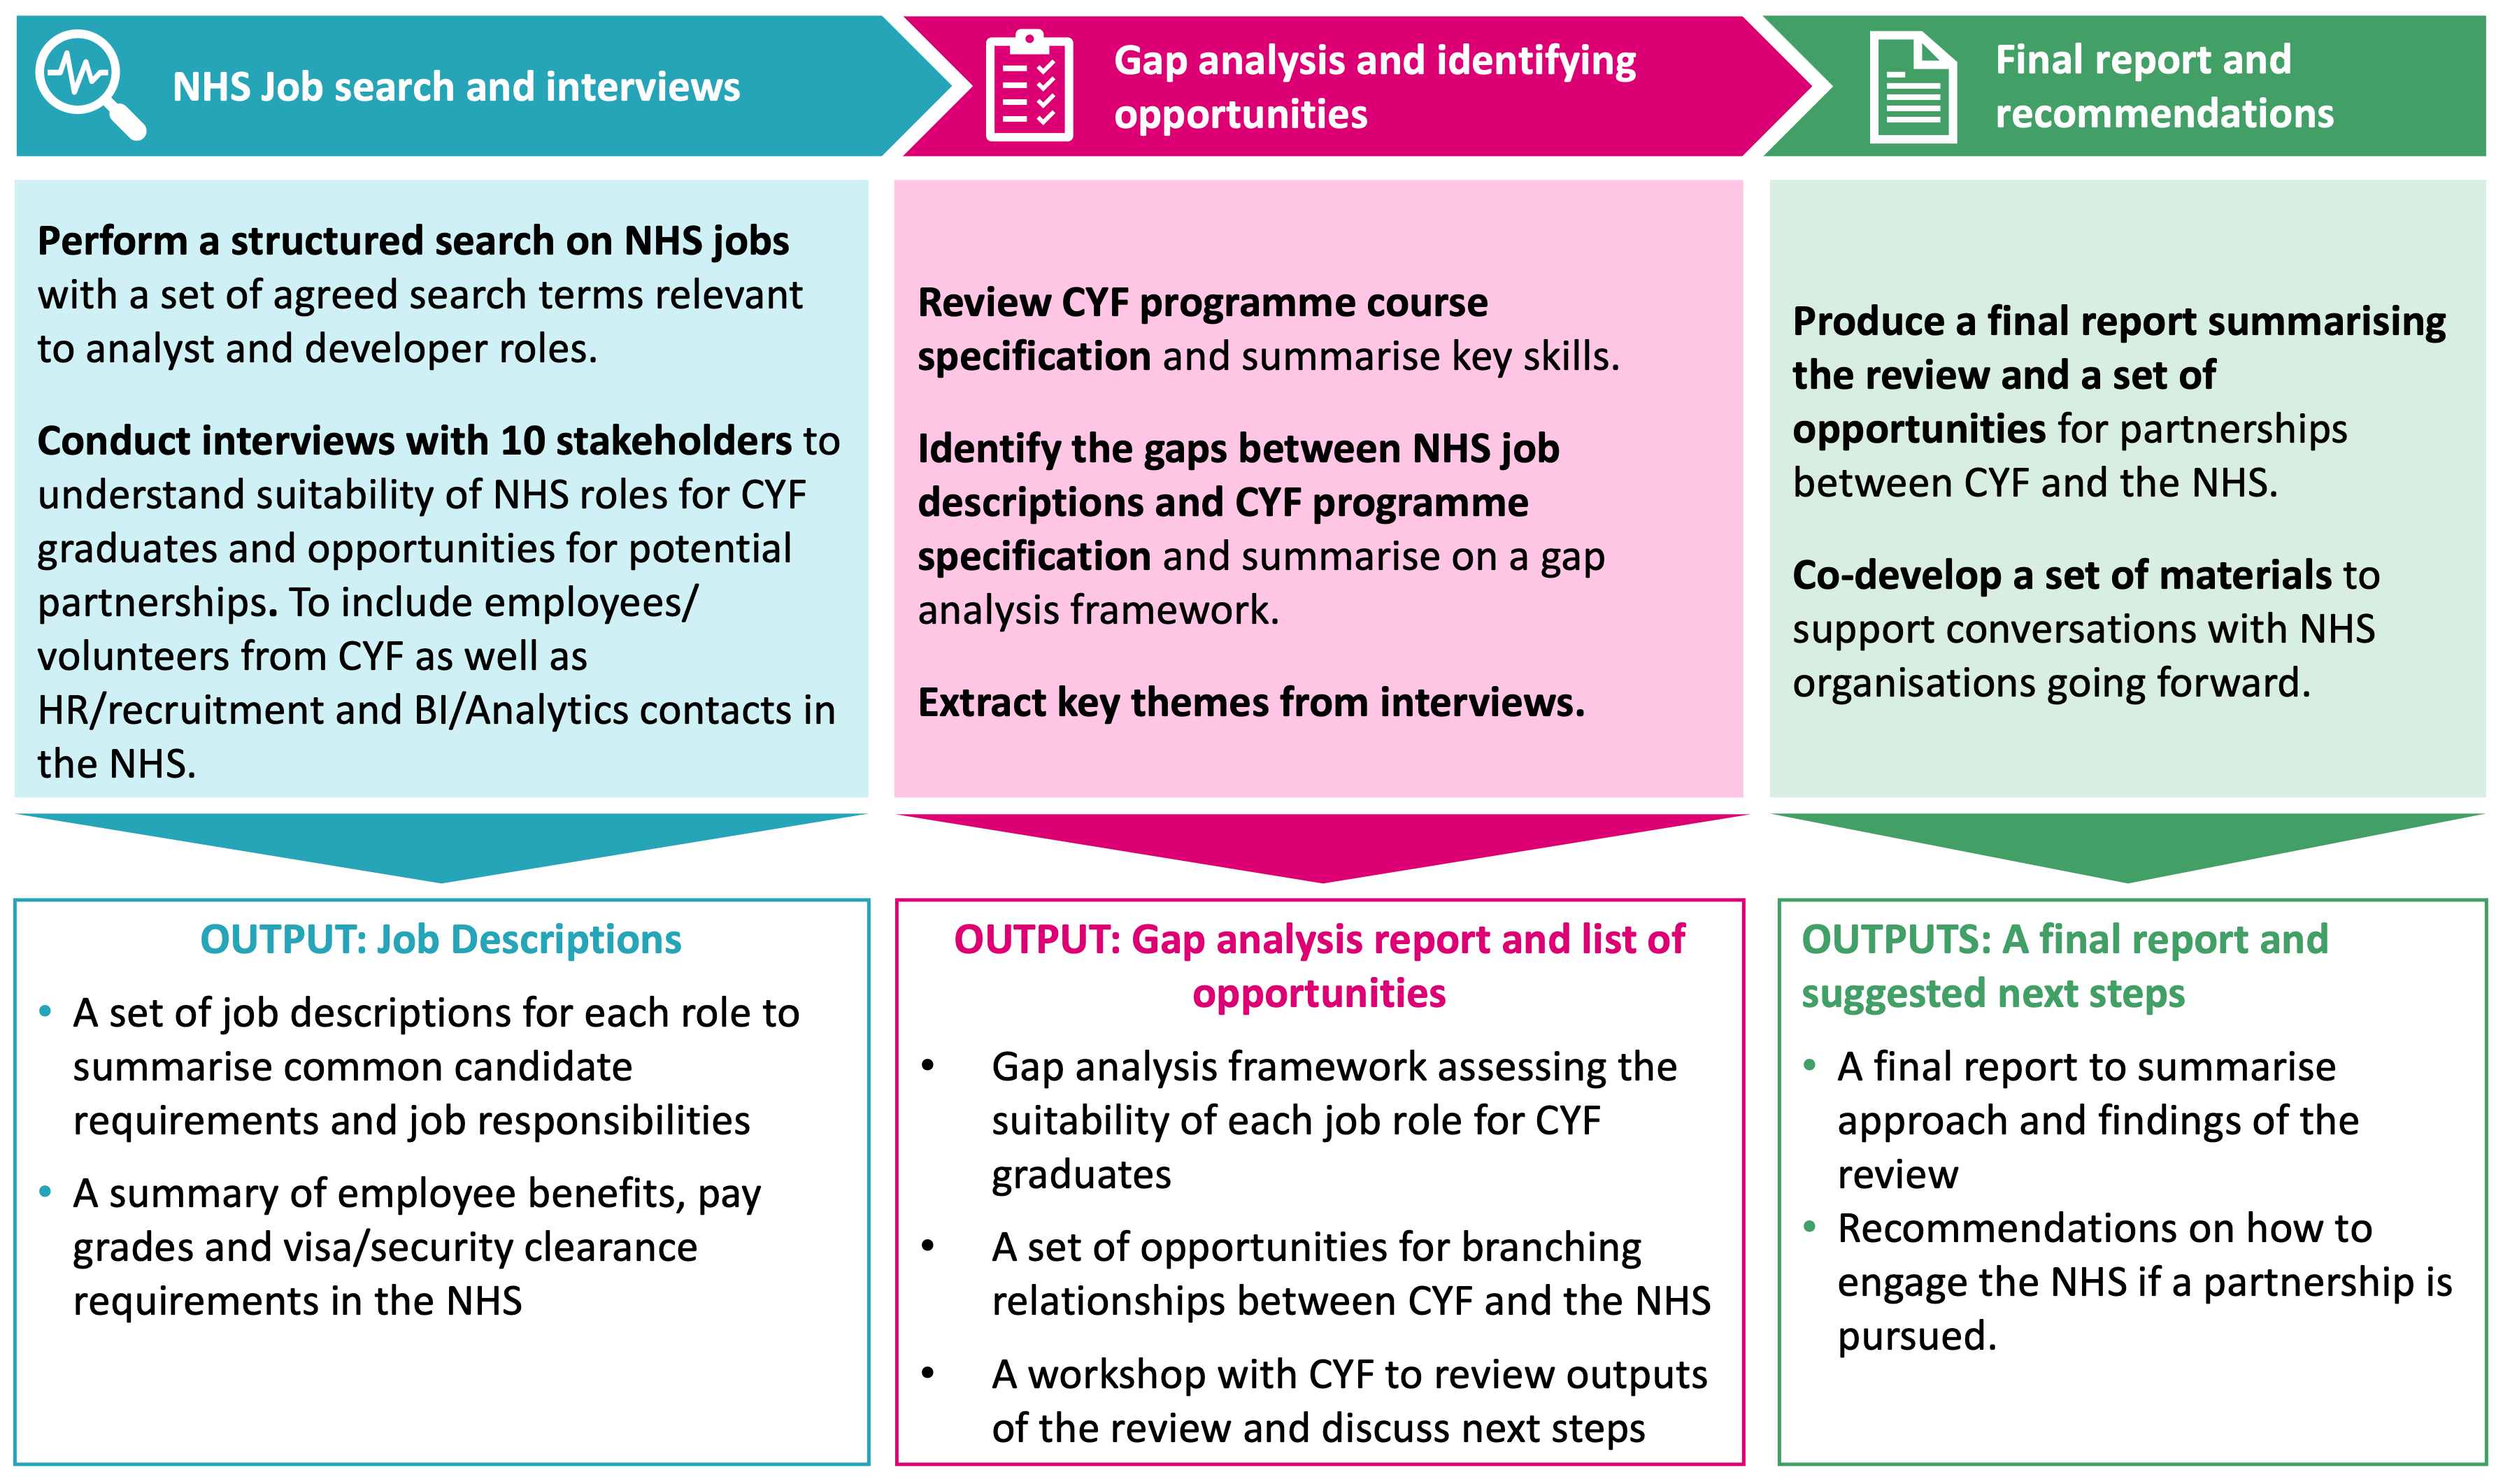 Summary of the approach taken throughout the project